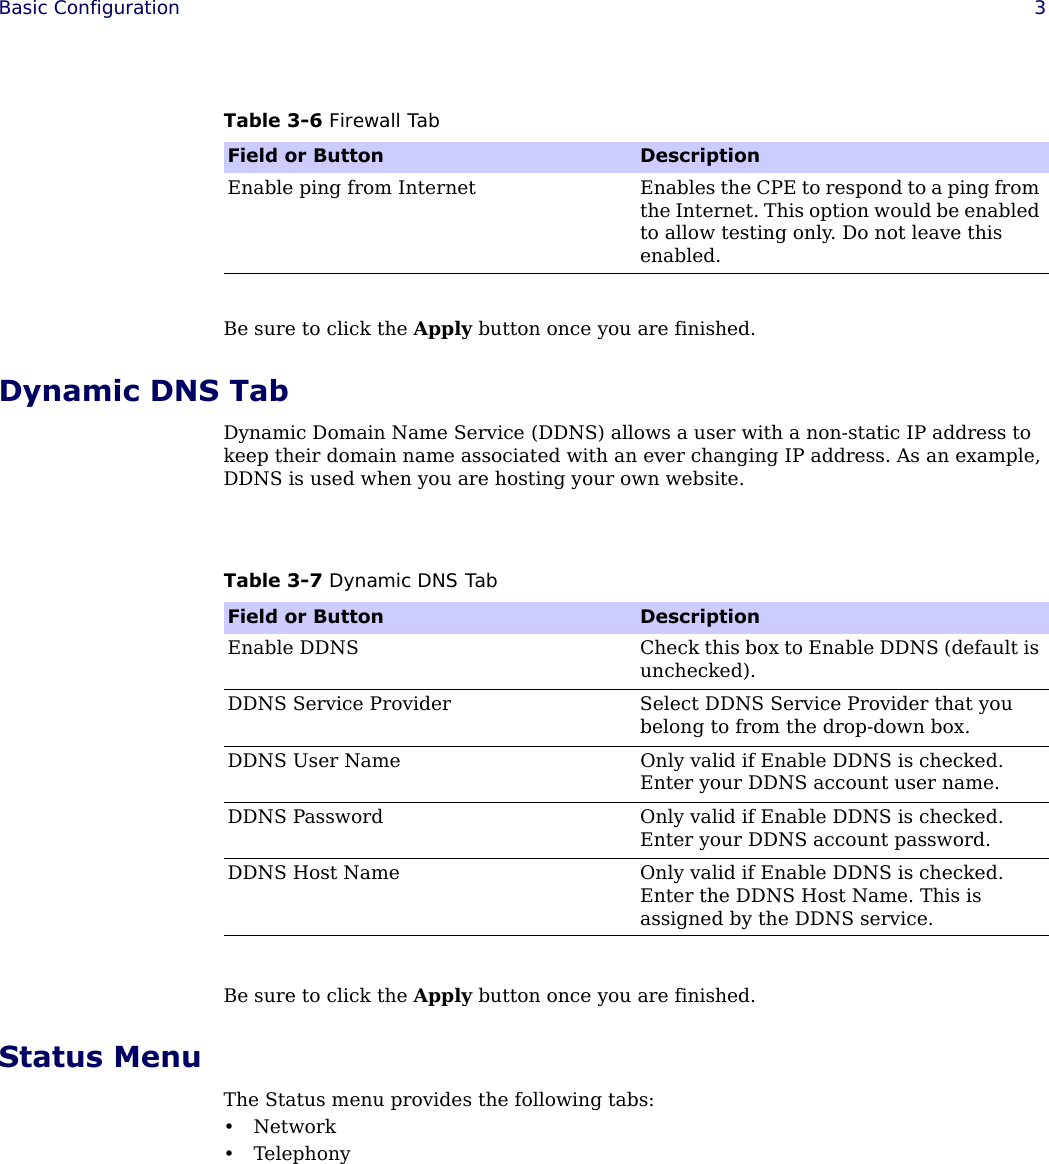 Basic Configuration 3Be sure to click the Apply button once you are finished.Dynamic DNS TabDynamic Domain Name Service (DDNS) allows a user with a non-static IP address to keep their domain name associated with an ever changing IP address. As an example, DDNS is used when you are hosting your own website.Be sure to click the Apply button once you are finished.Status MenuThe Status menu provides the following tabs:•Network•TelephonyEnable ping from Internet Enables the CPE to respond to a ping from the Internet. This option would be enabled to allow testing only. Do not leave this enabled.Table 3-6 Firewall TabField or Button DescriptionTable 3-7 Dynamic DNS TabField or Button DescriptionEnable DDNS Check this box to Enable DDNS (default is unchecked).DDNS Service Provider Select DDNS Service Provider that you belong to from the drop-down box. DDNS User Name Only valid if Enable DDNS is checked. Enter your DDNS account user name.DDNS Password Only valid if Enable DDNS is checked. Enter your DDNS account password.DDNS Host Name Only valid if Enable DDNS is checked. Enter the DDNS Host Name. This is assigned by the DDNS service.